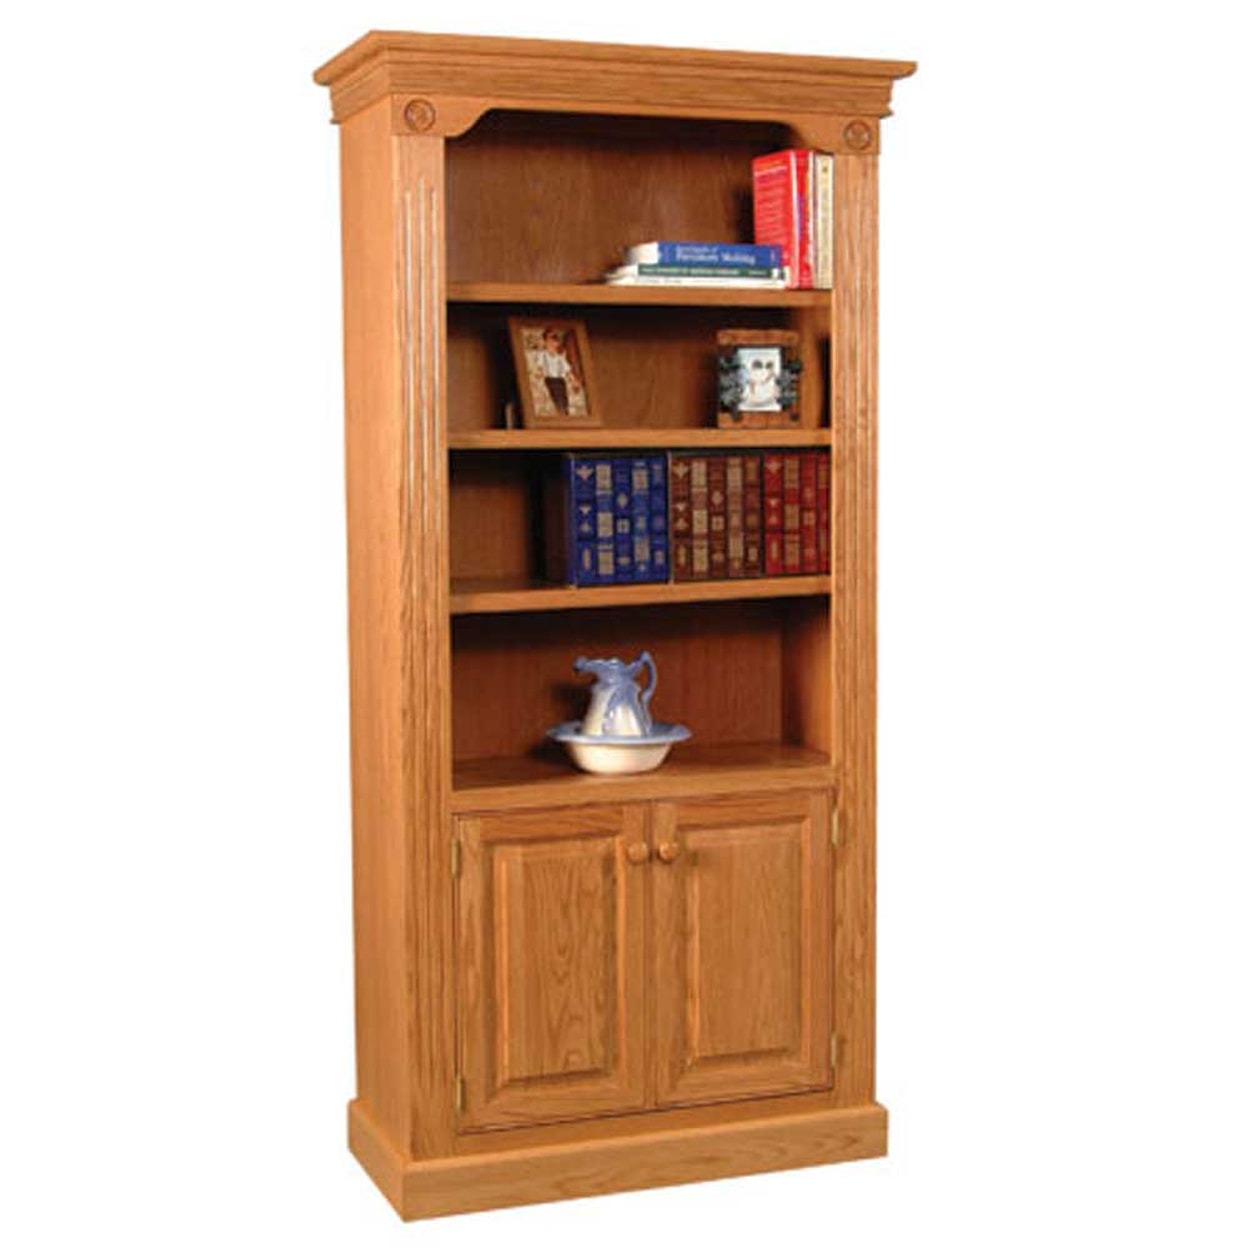 Simply Amish Imperial Amish Bookcase w/ Wood Doors